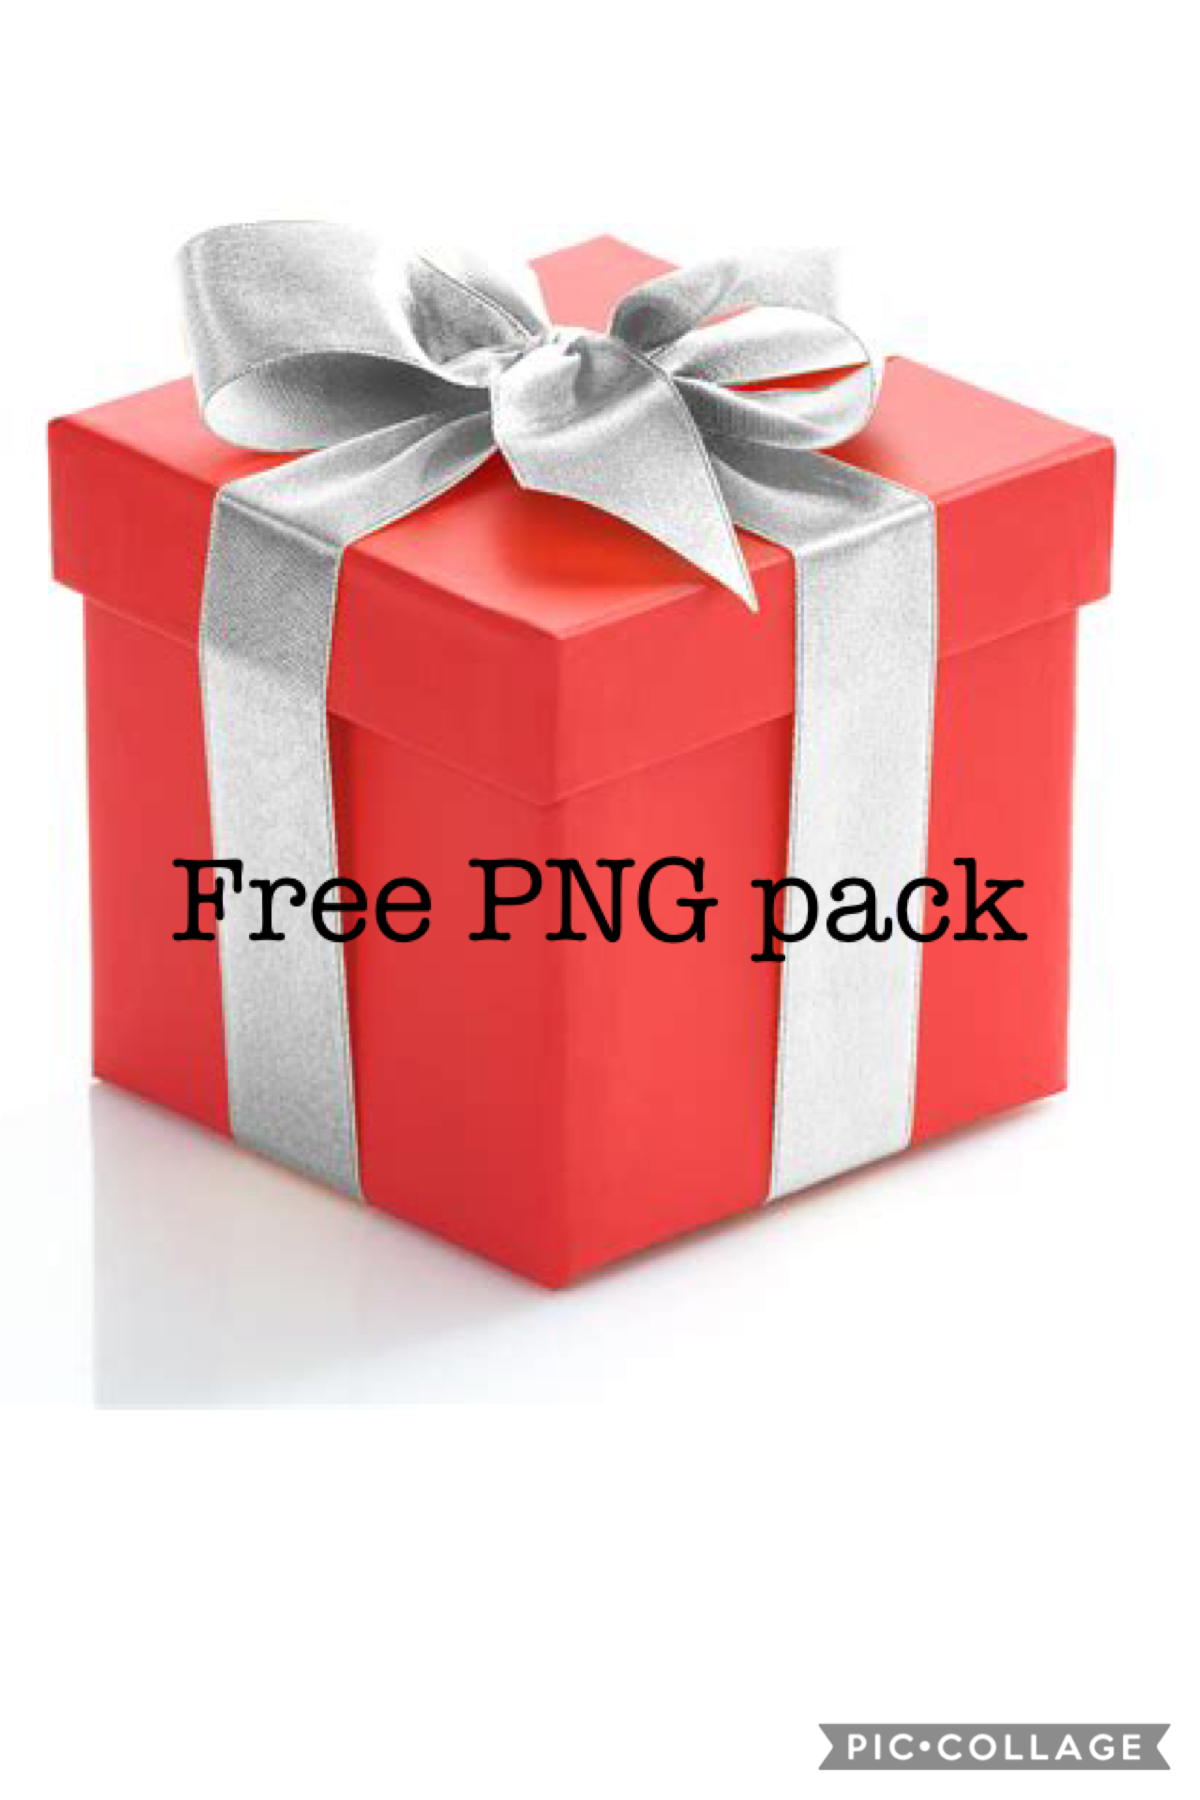 Free PNG pack